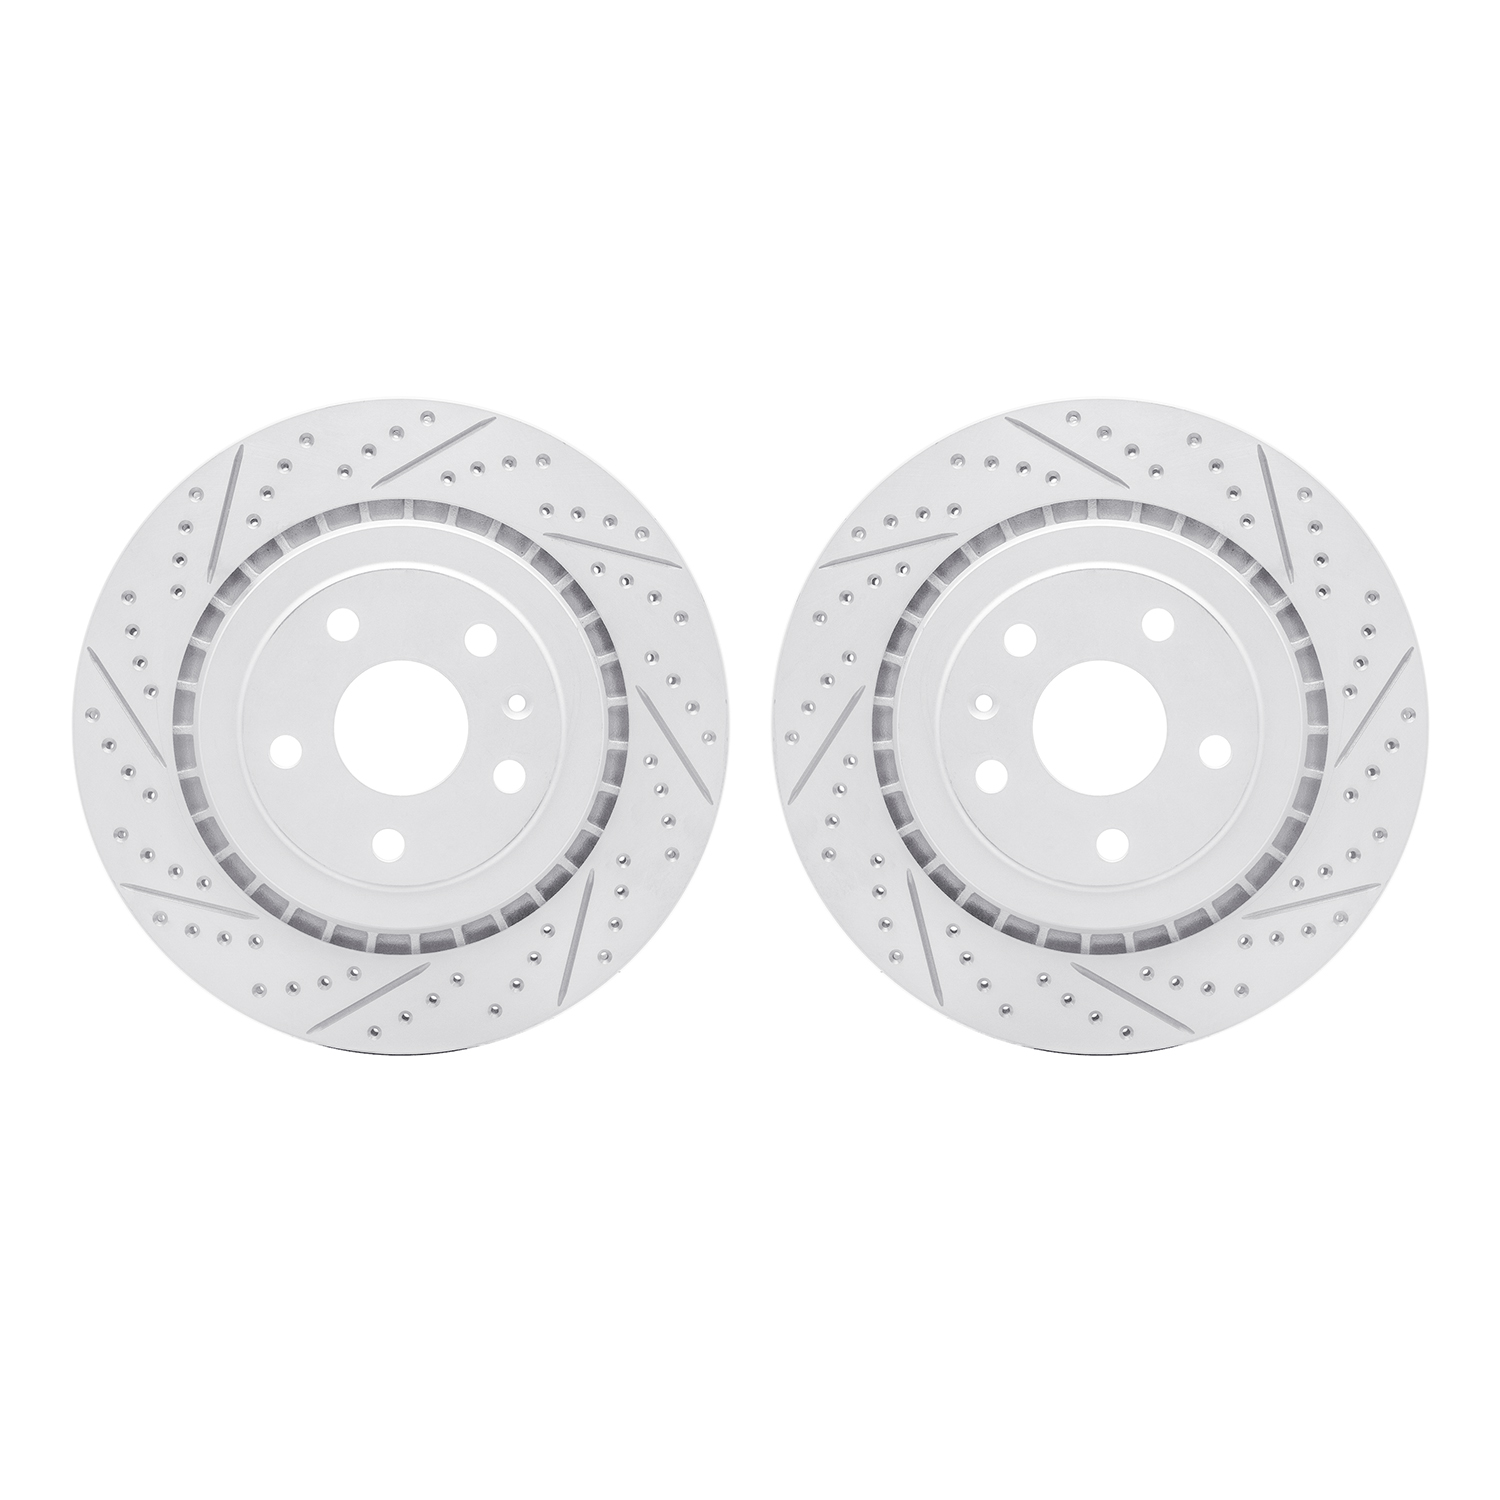 2002-47034 Geoperformance Drilled/Slotted Brake Rotors, Fits Select GM, Position: Rear